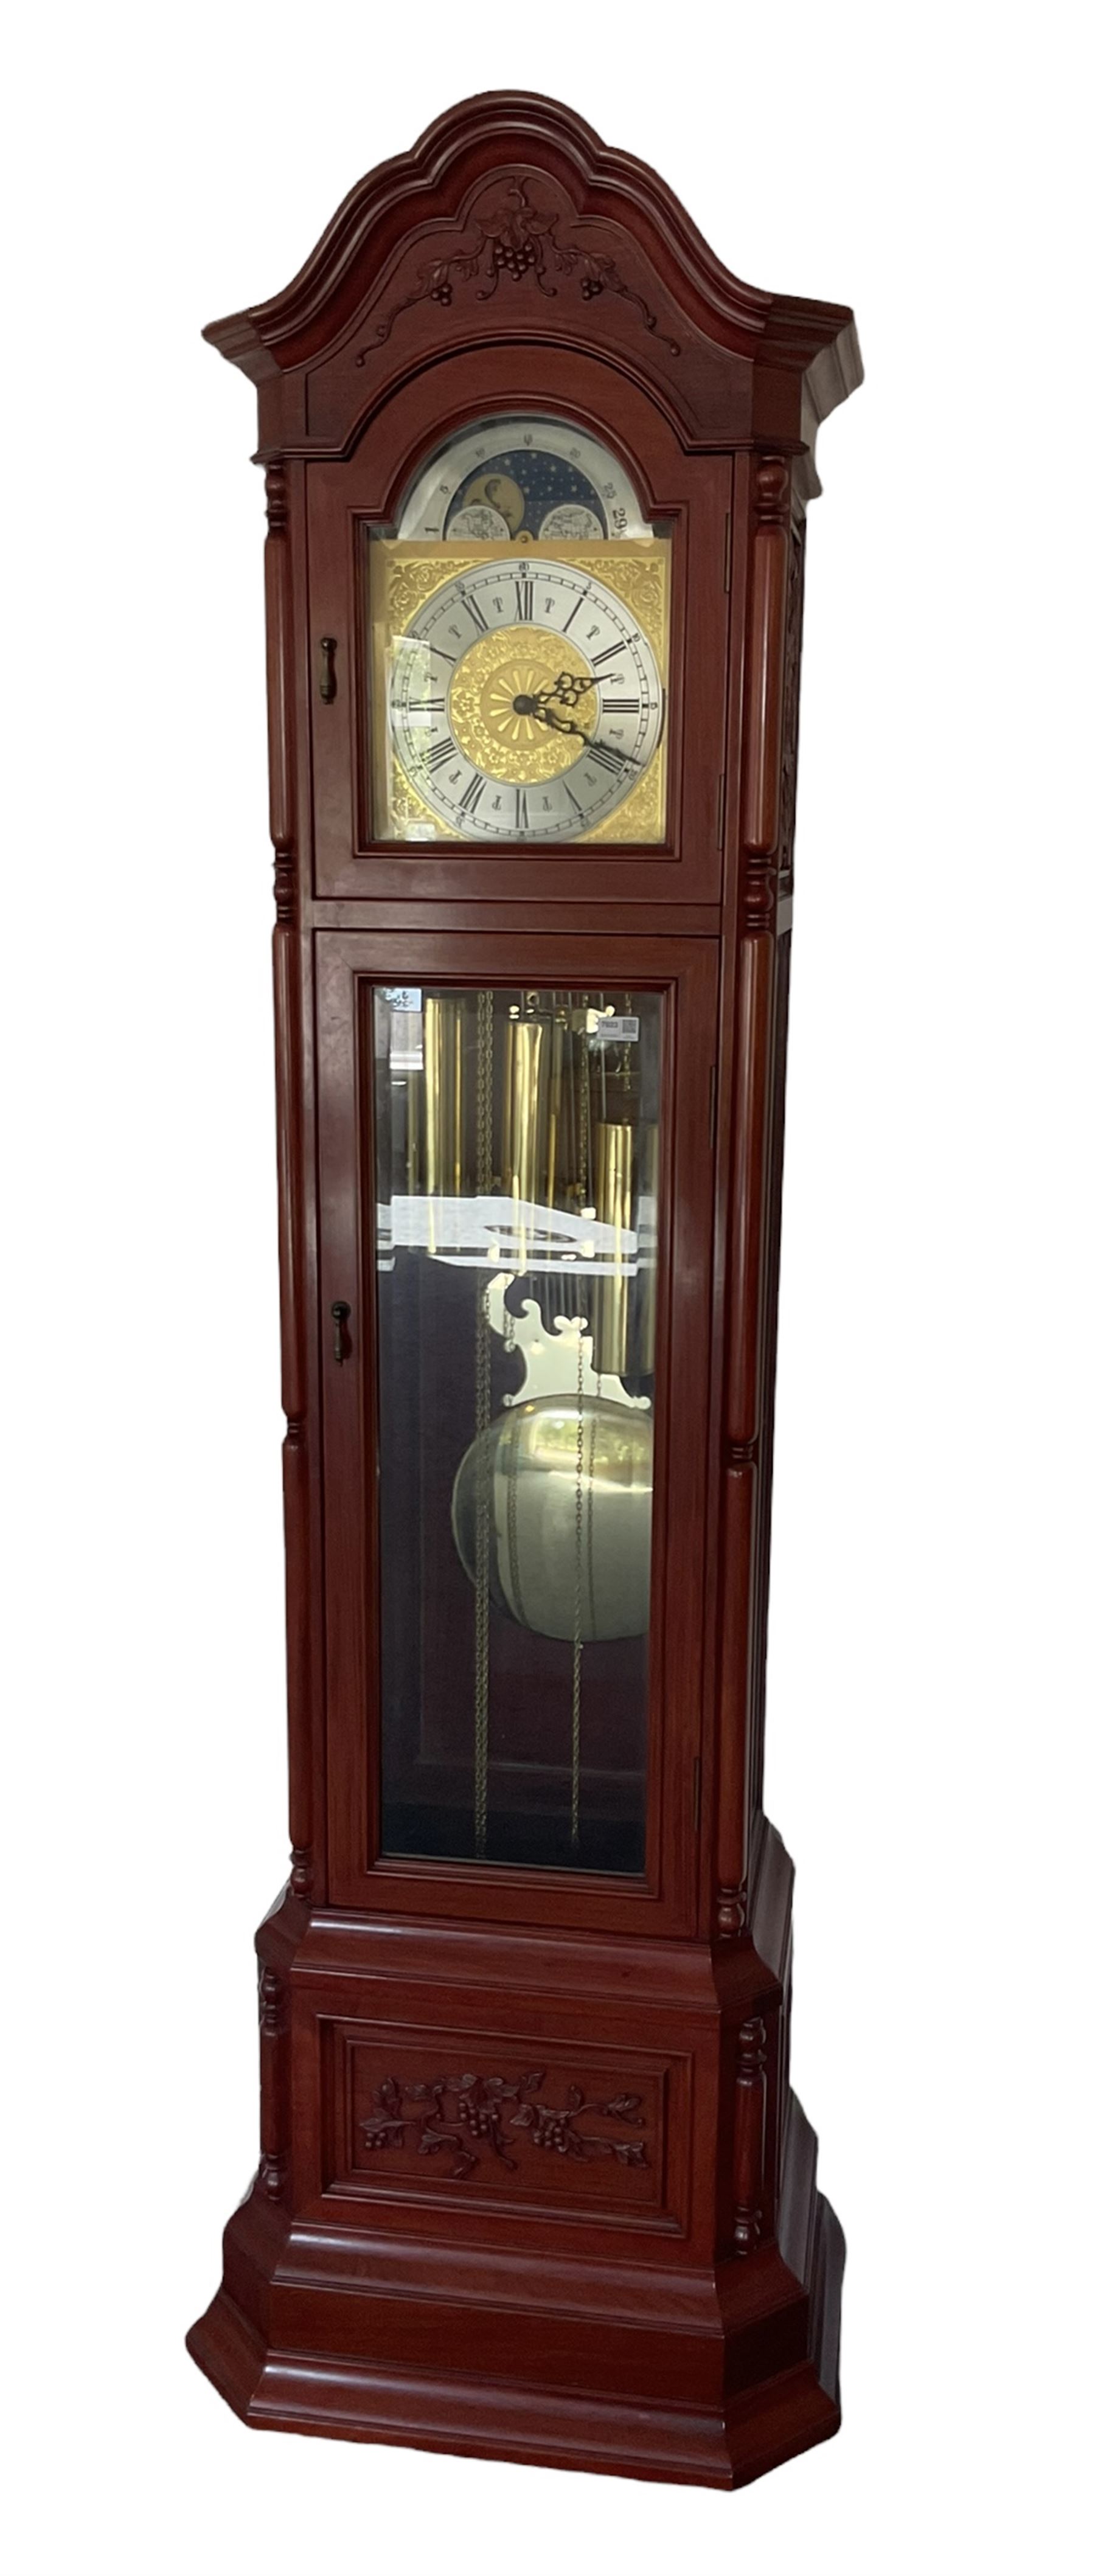 An impressive 20th century longcase clock in a mahogany case with an arched pediment